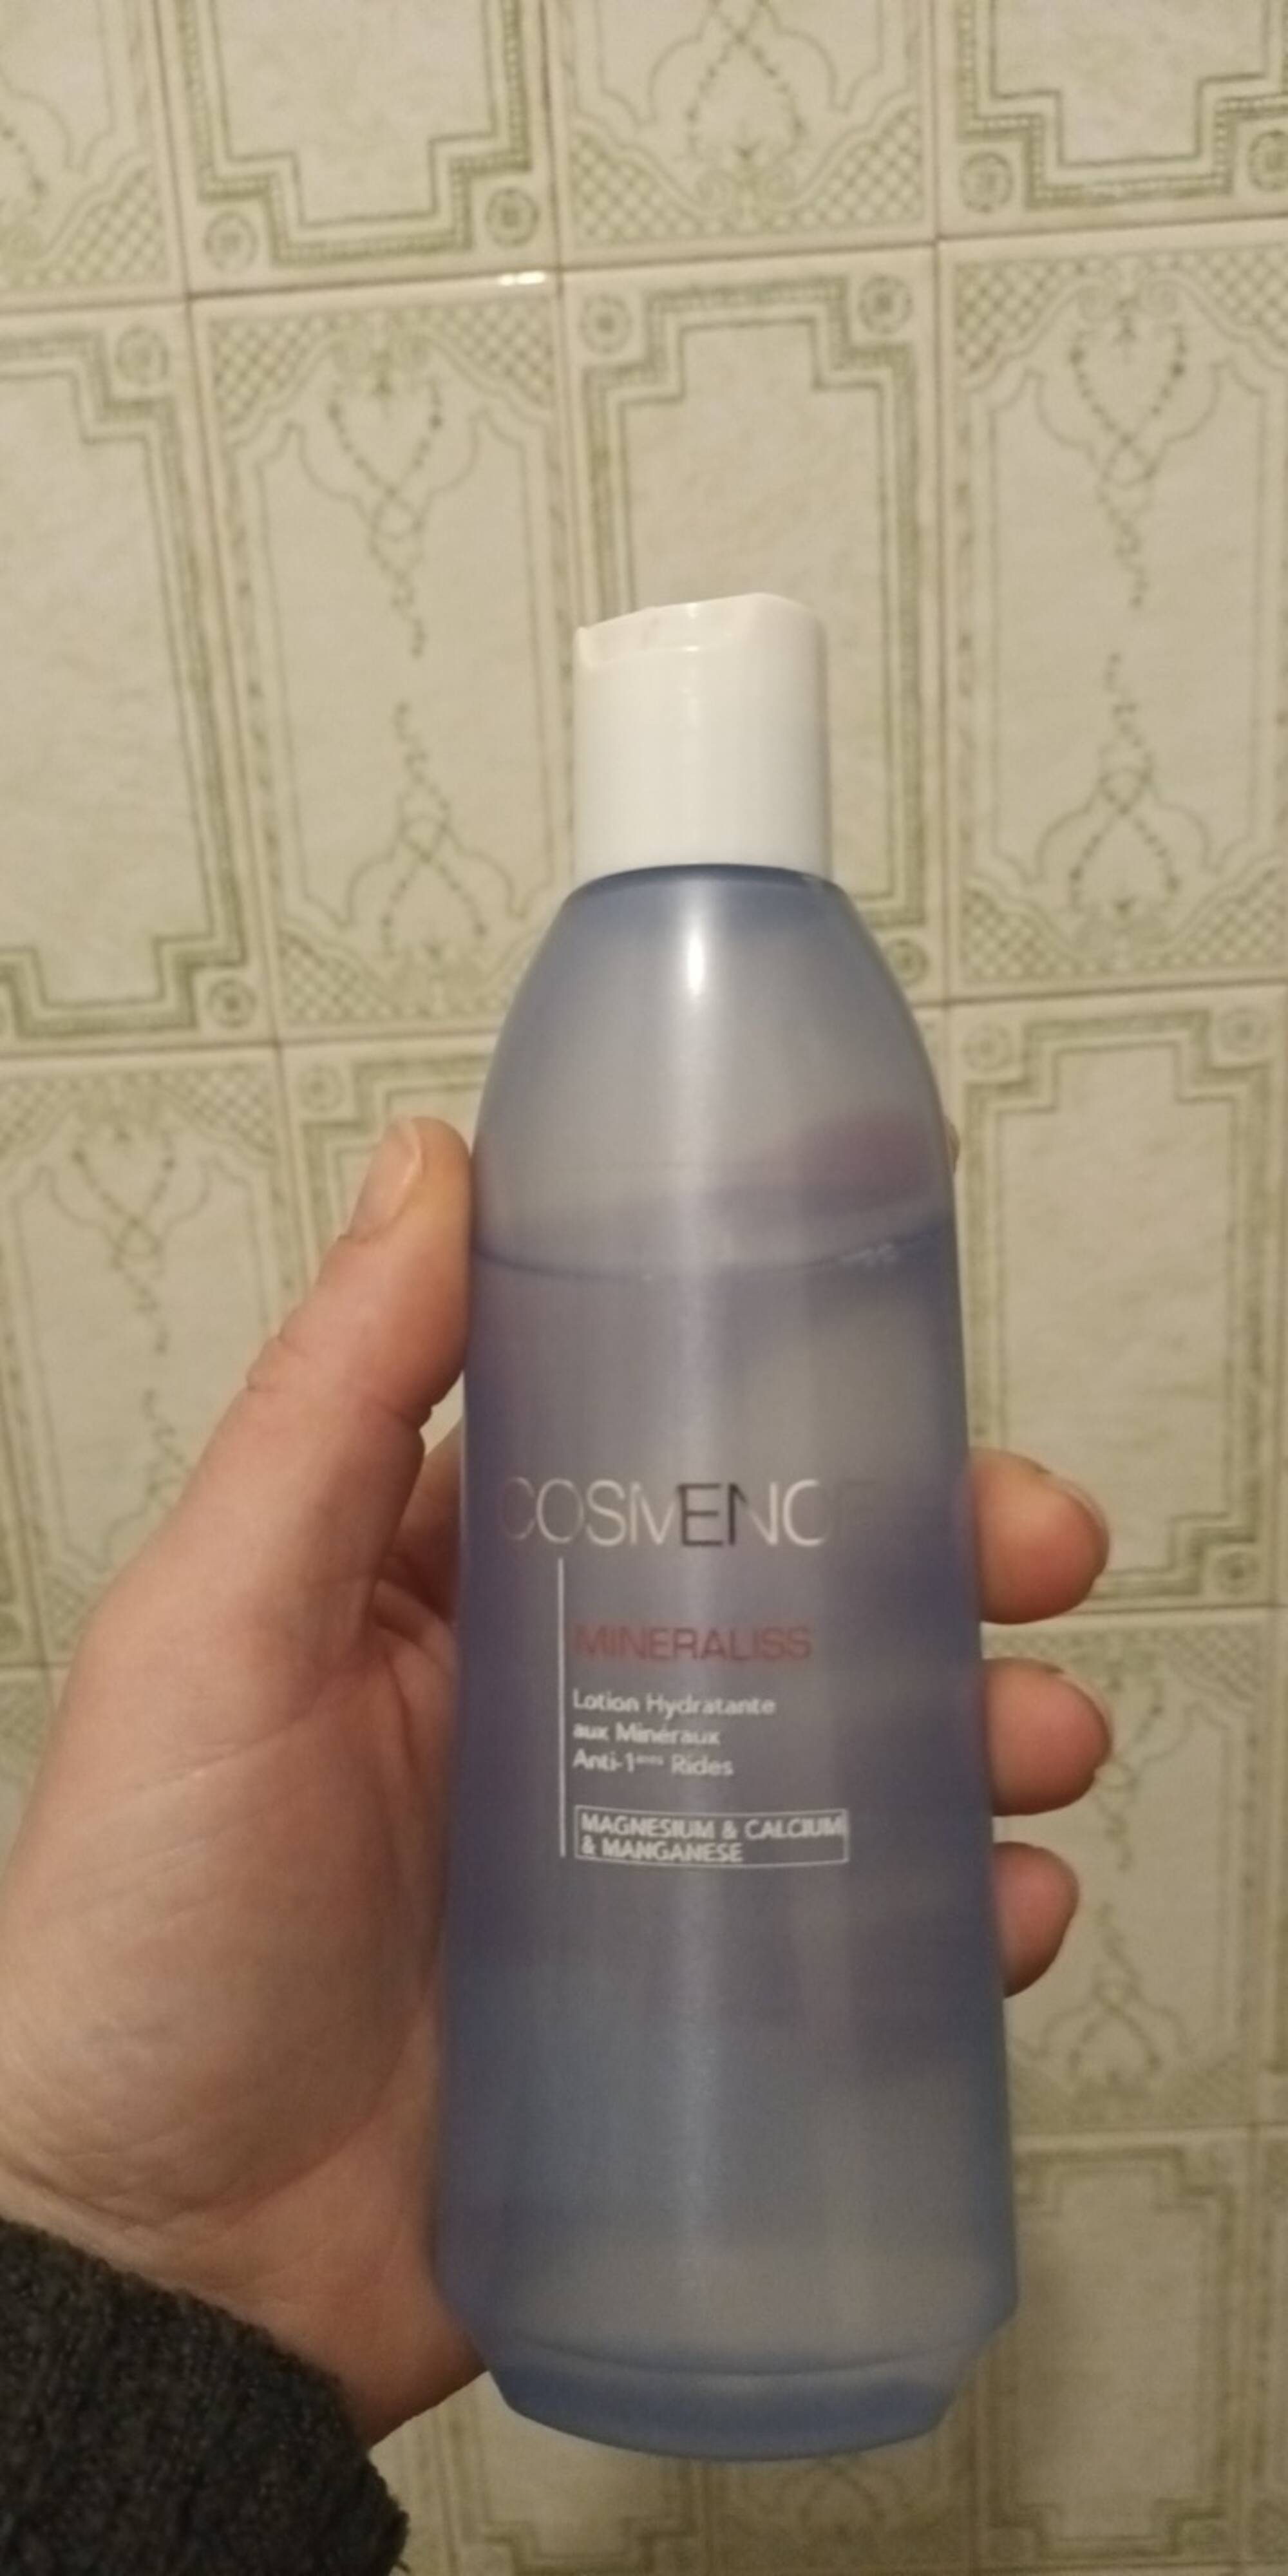 COSMENCE - Mineraliss - Lotion hydratante